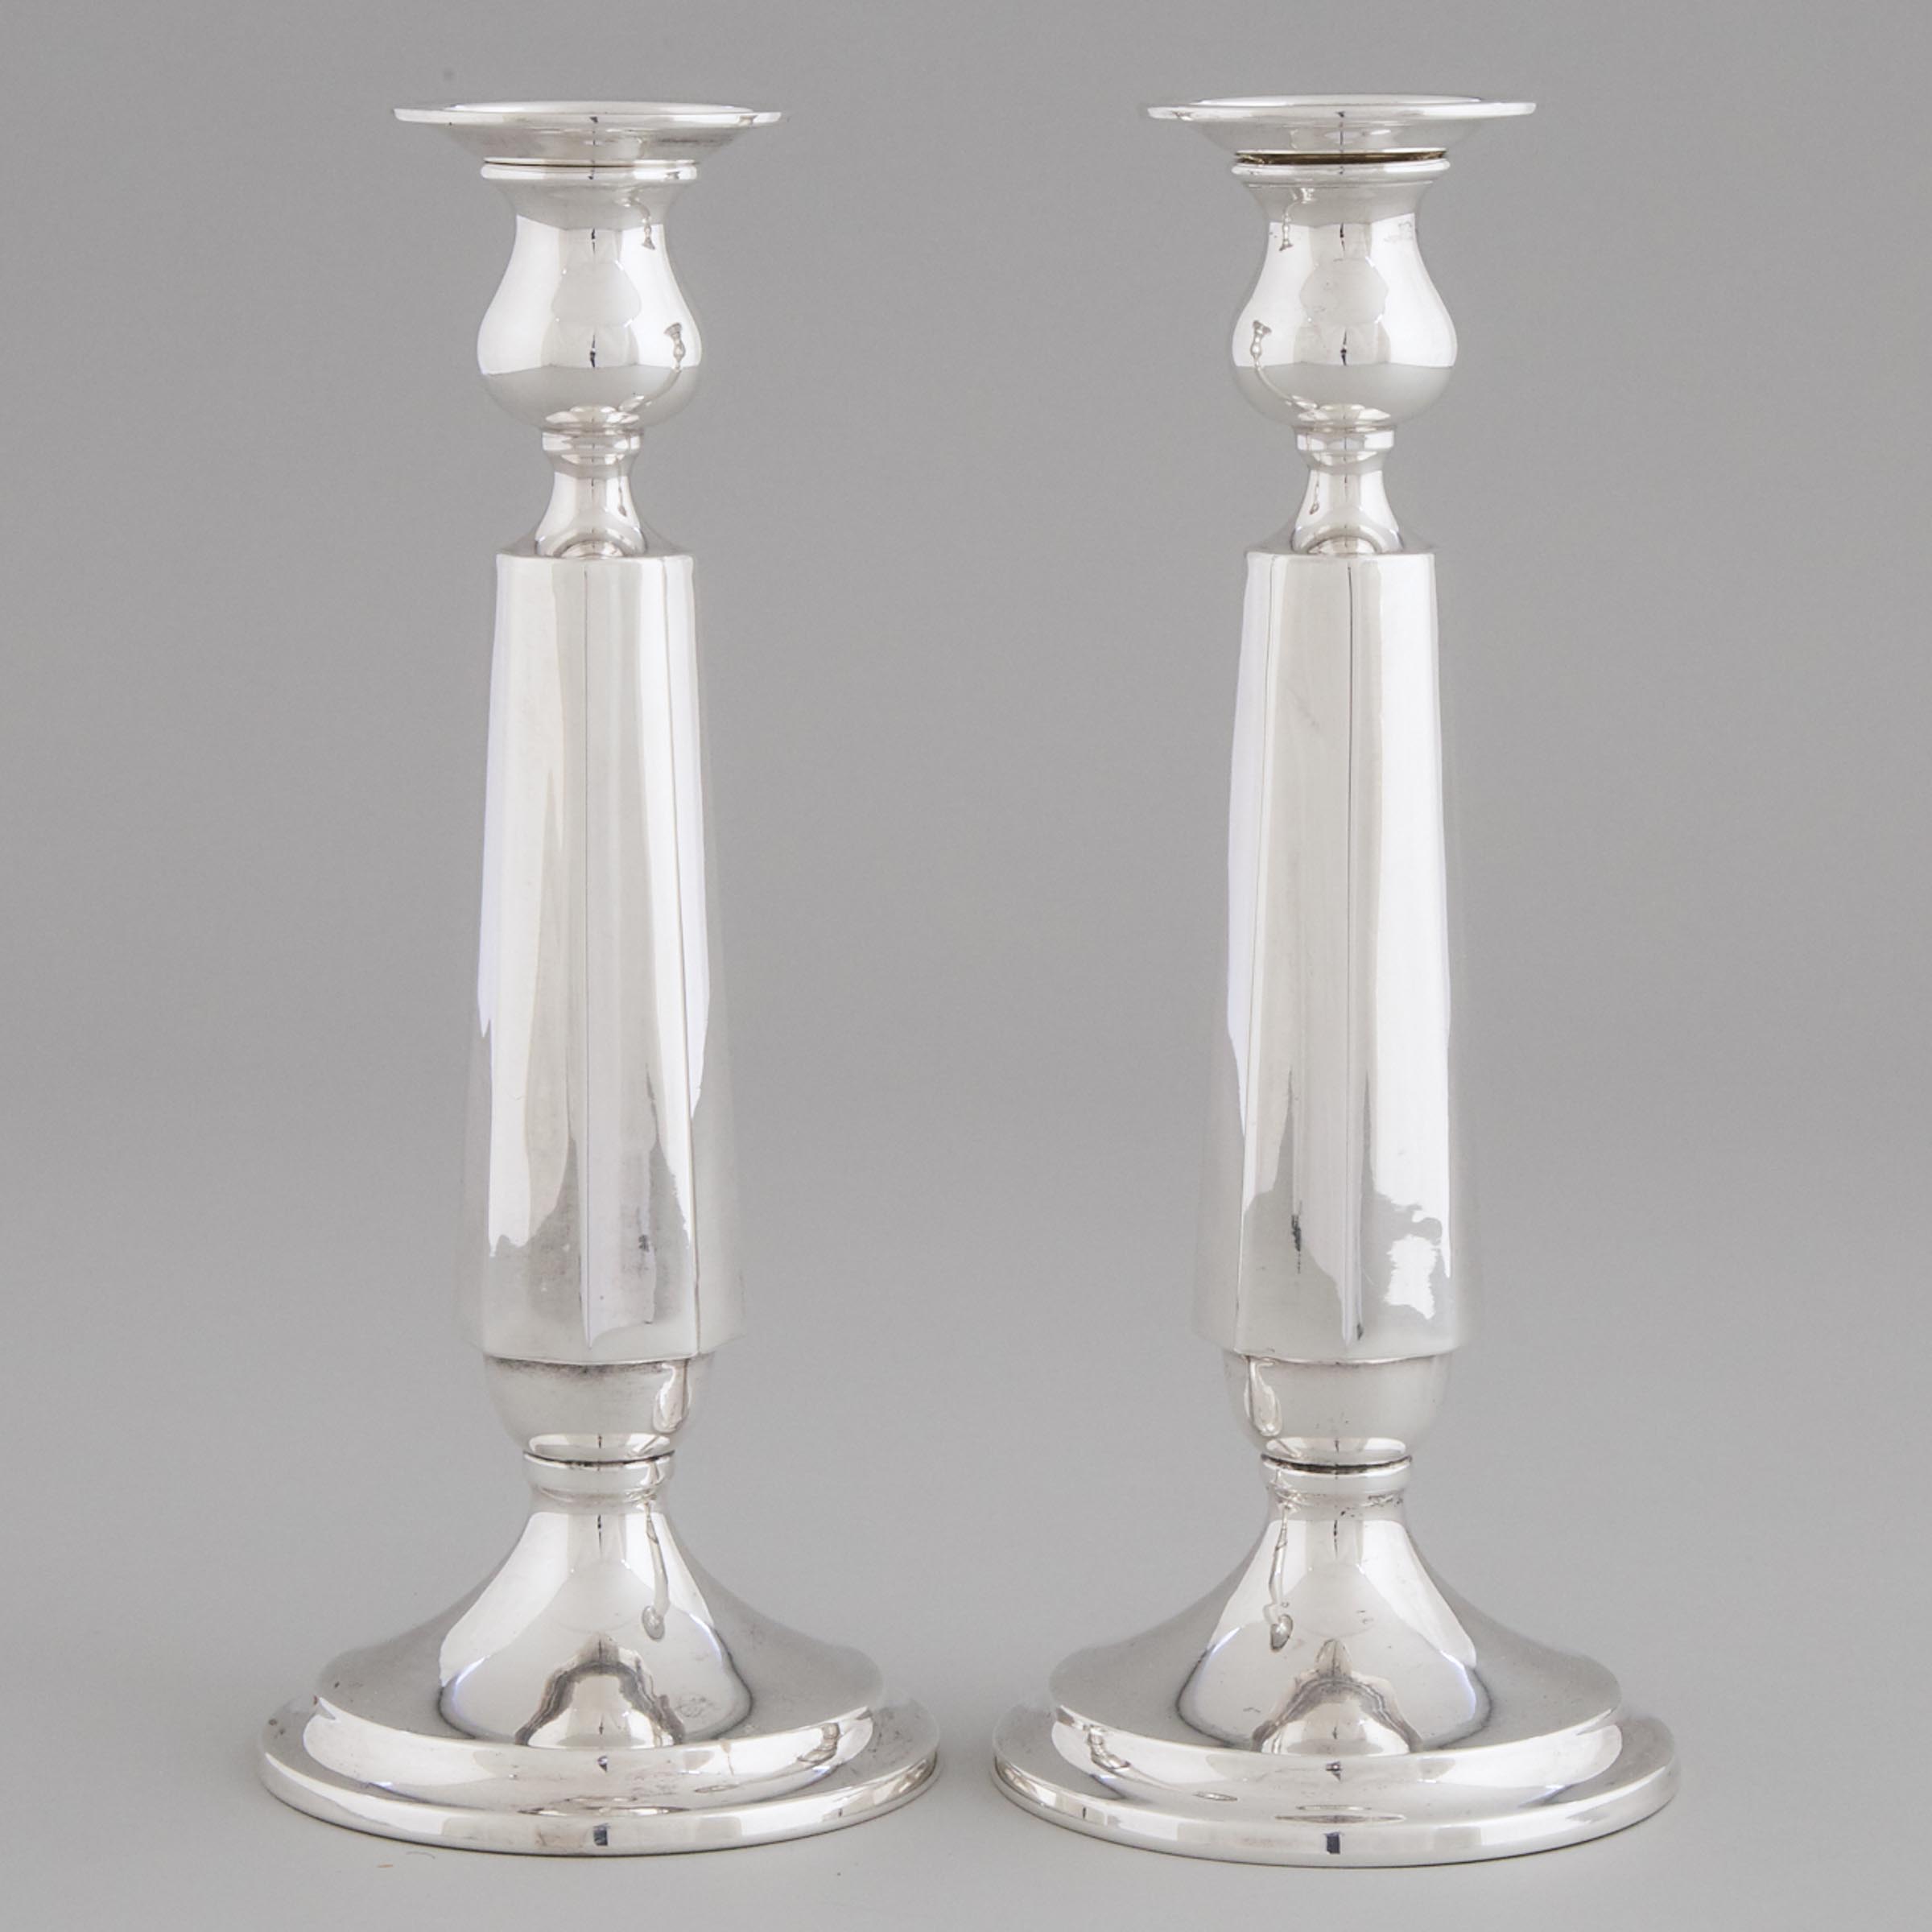 Pair of North American Silver Table Candlesticks, 20th century